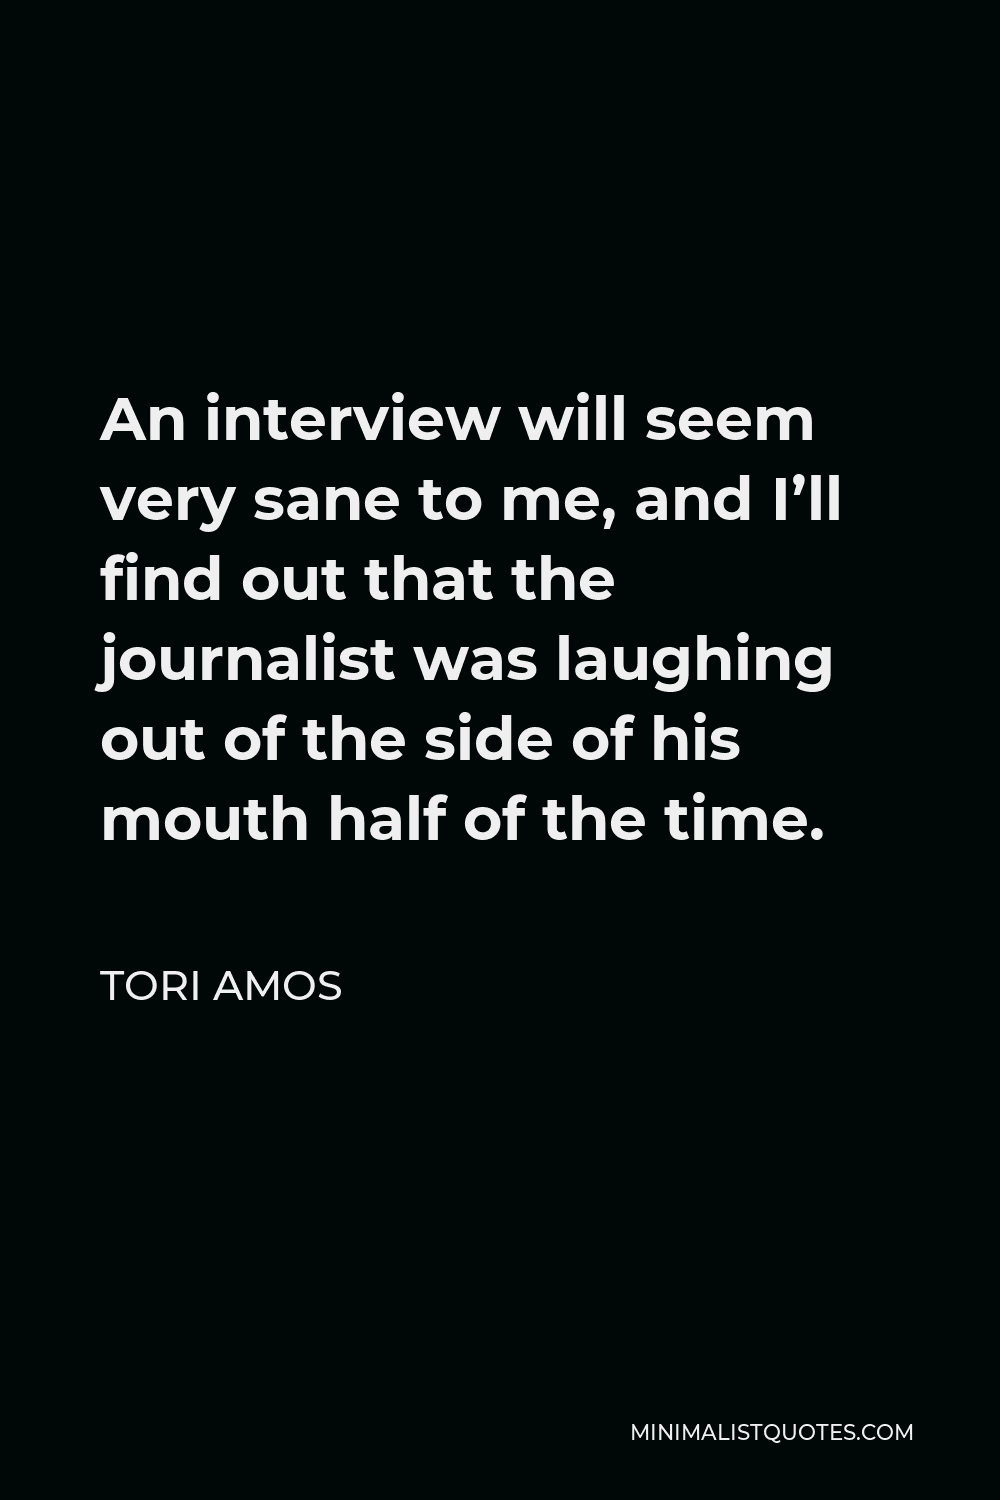 Tori Amos Quote - An interview will seem very sane to me, and I’ll find out that the journalist was laughing out of the side of his mouth half of the time.